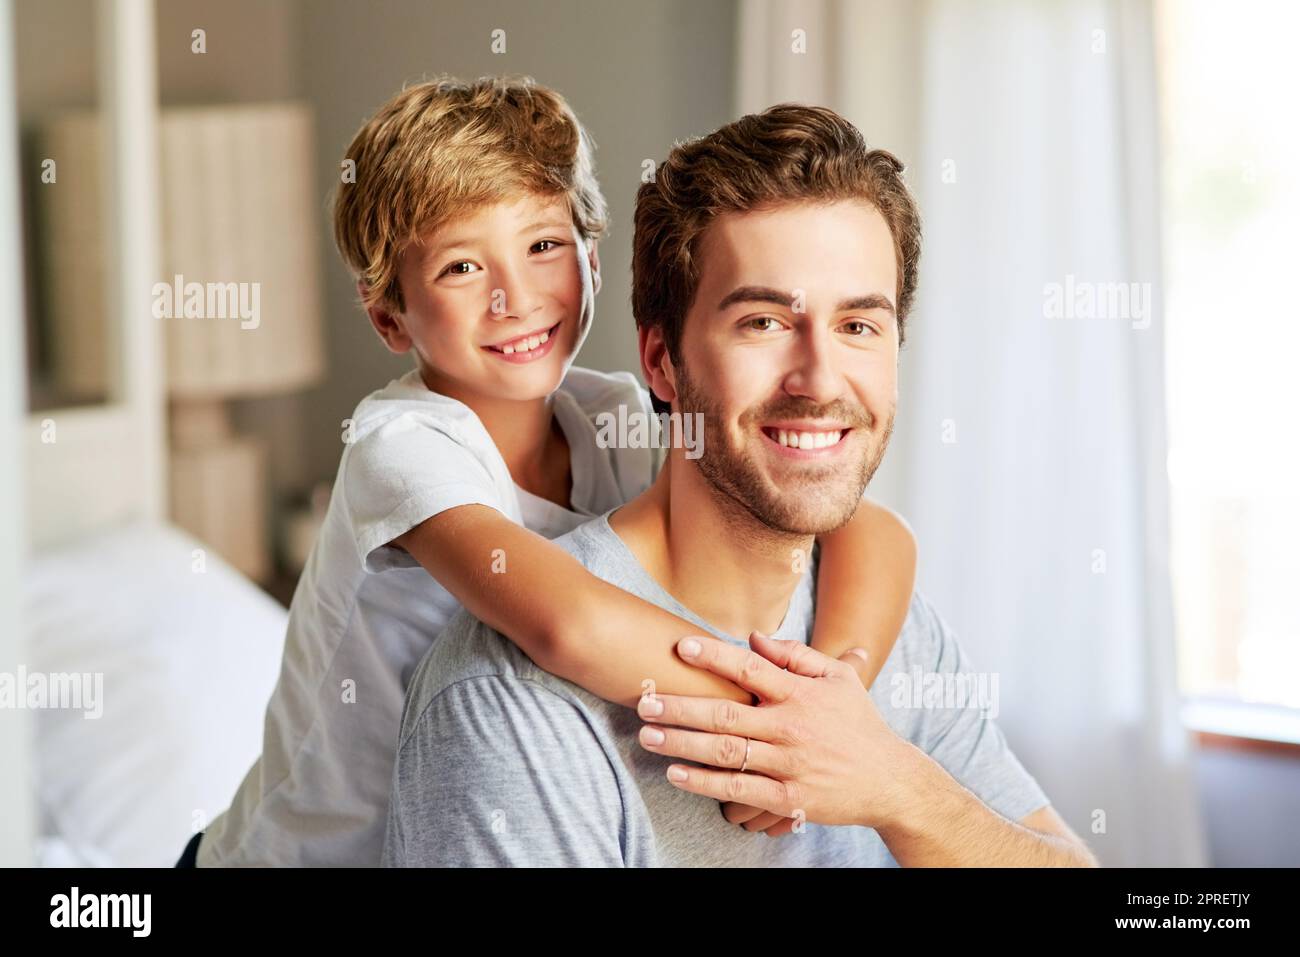 My dad is my best friend. Portrait of a cheerful young boy holding and leaning on his fathers back at home during the day. Stock Photo